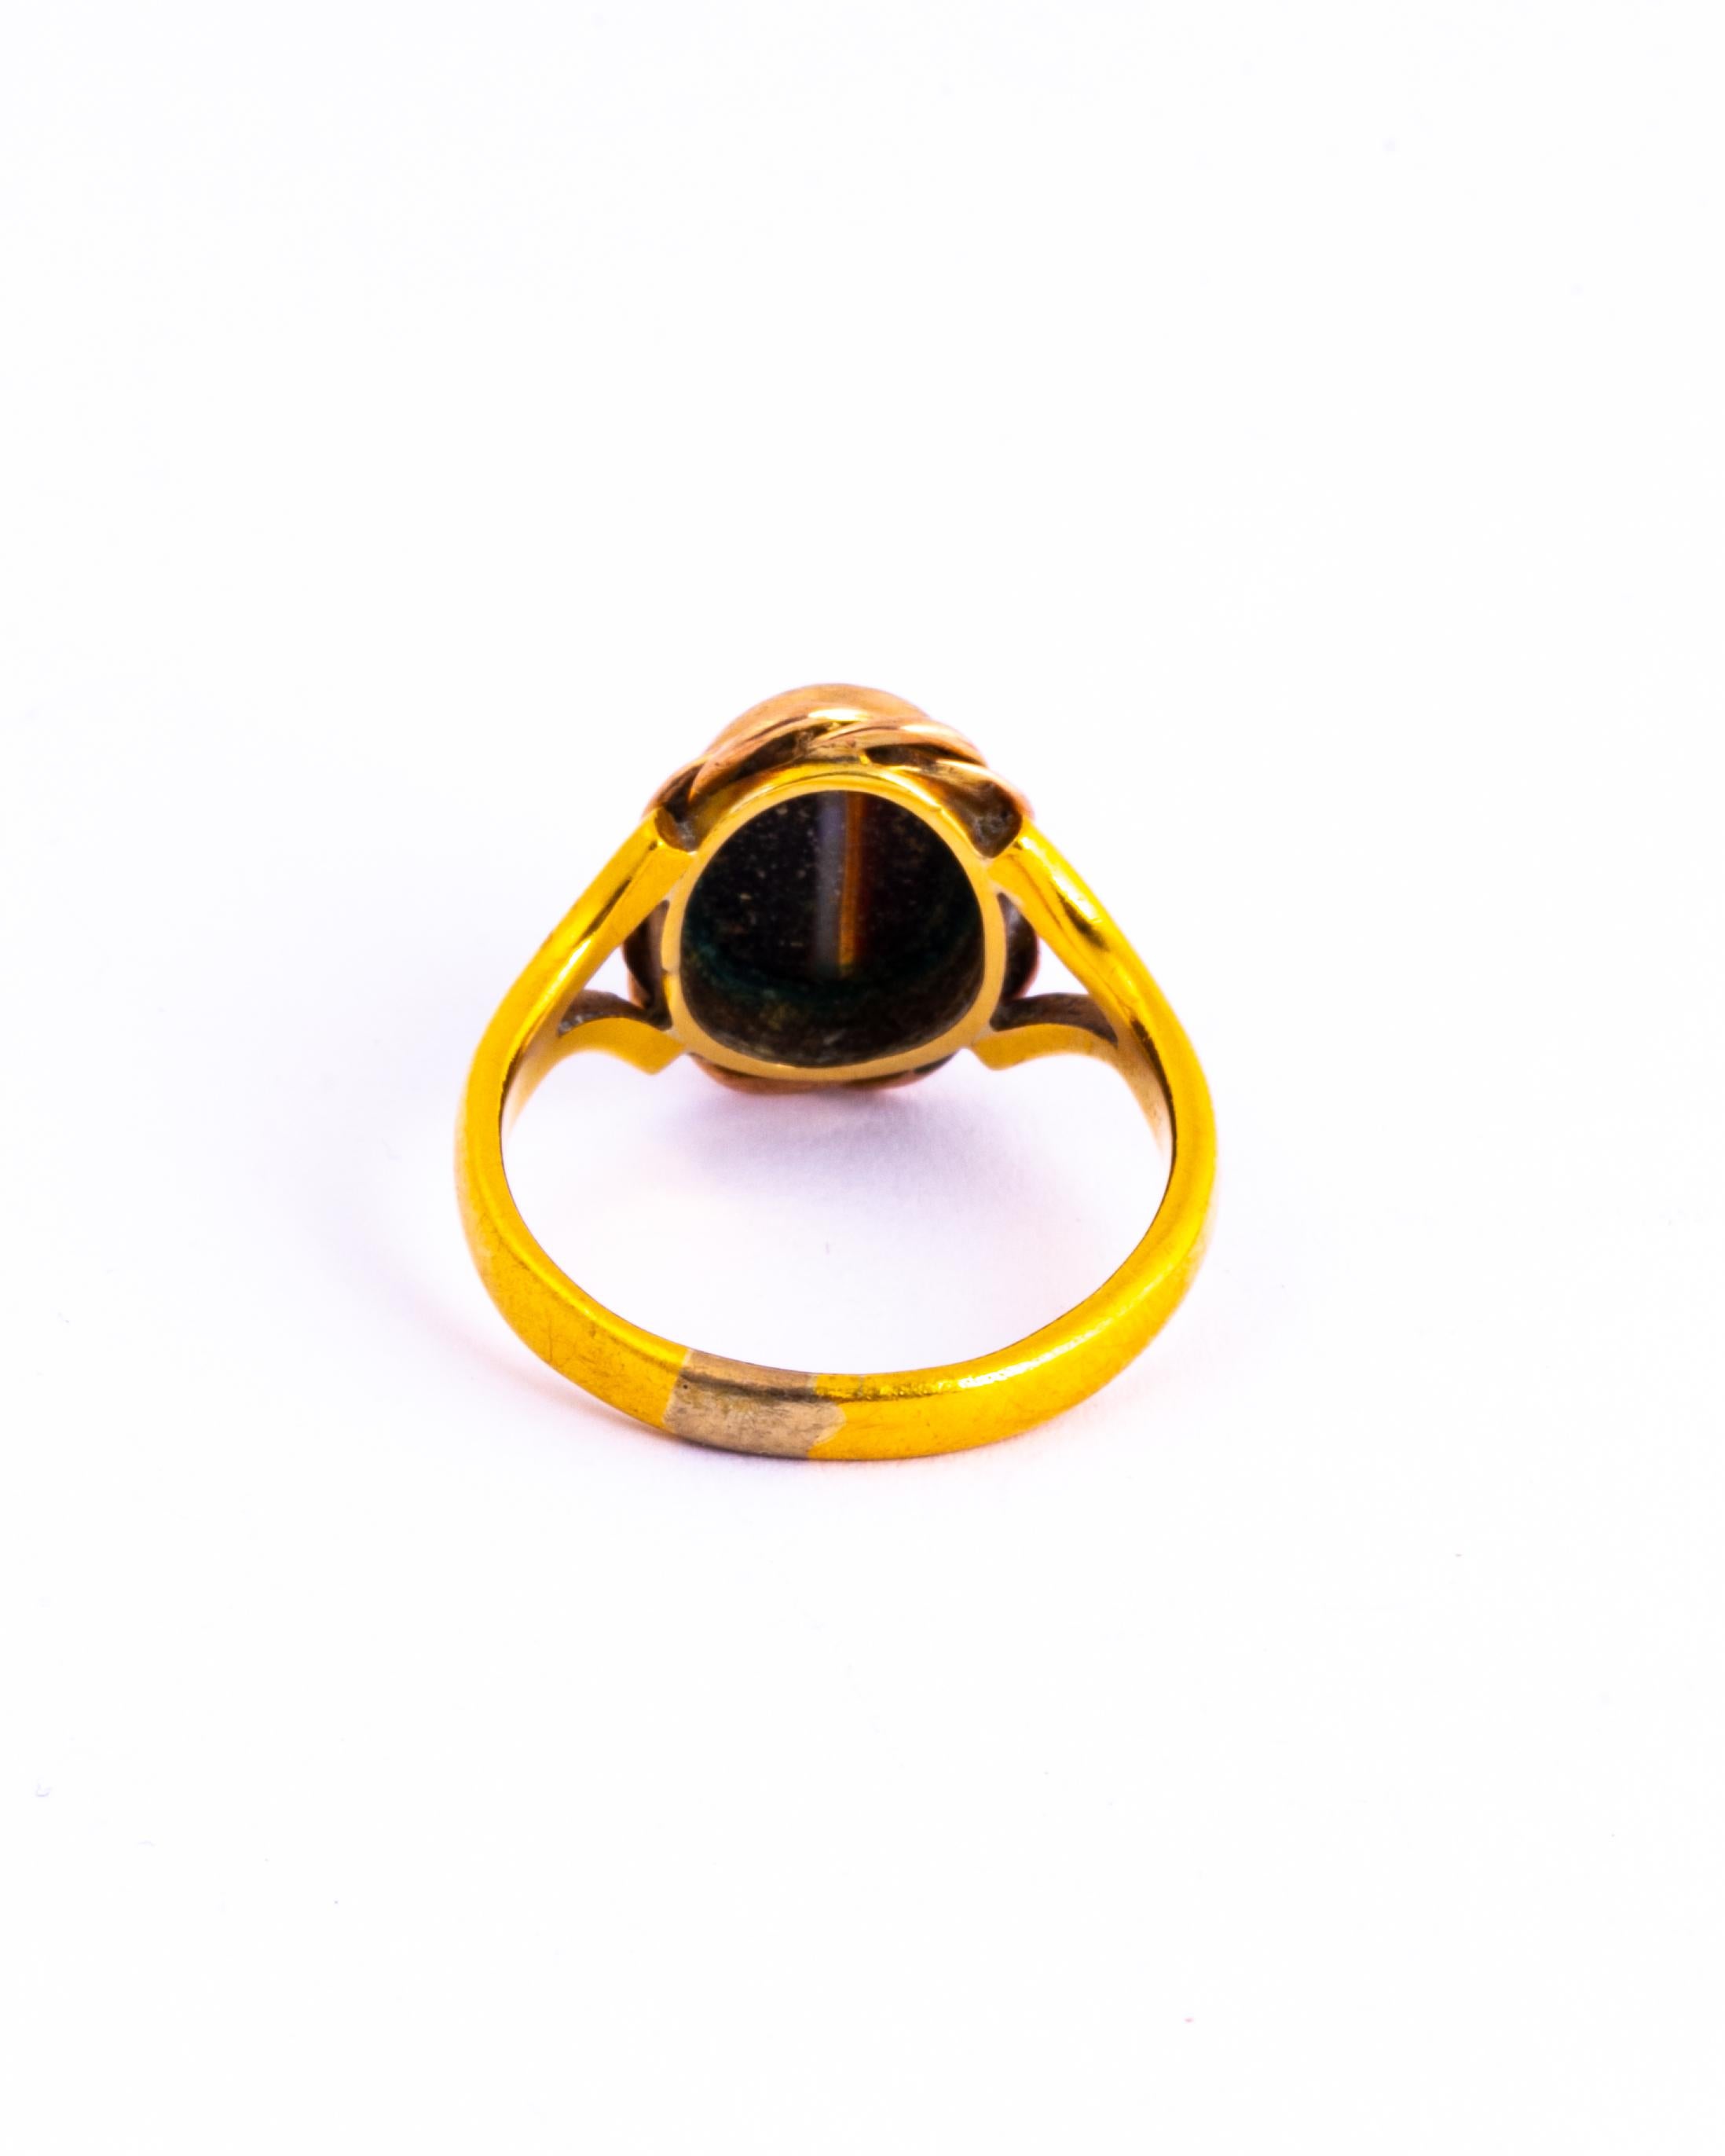 This banded Agate is so glossy and beautiful! This stone is set in 9 carat gold with rope twist detail which goes perfectly with the Agate.

Ring Size: O 1/2 or 7 1/2
Stone Dimensions: 10.5x8mm

Weight: 5.3g